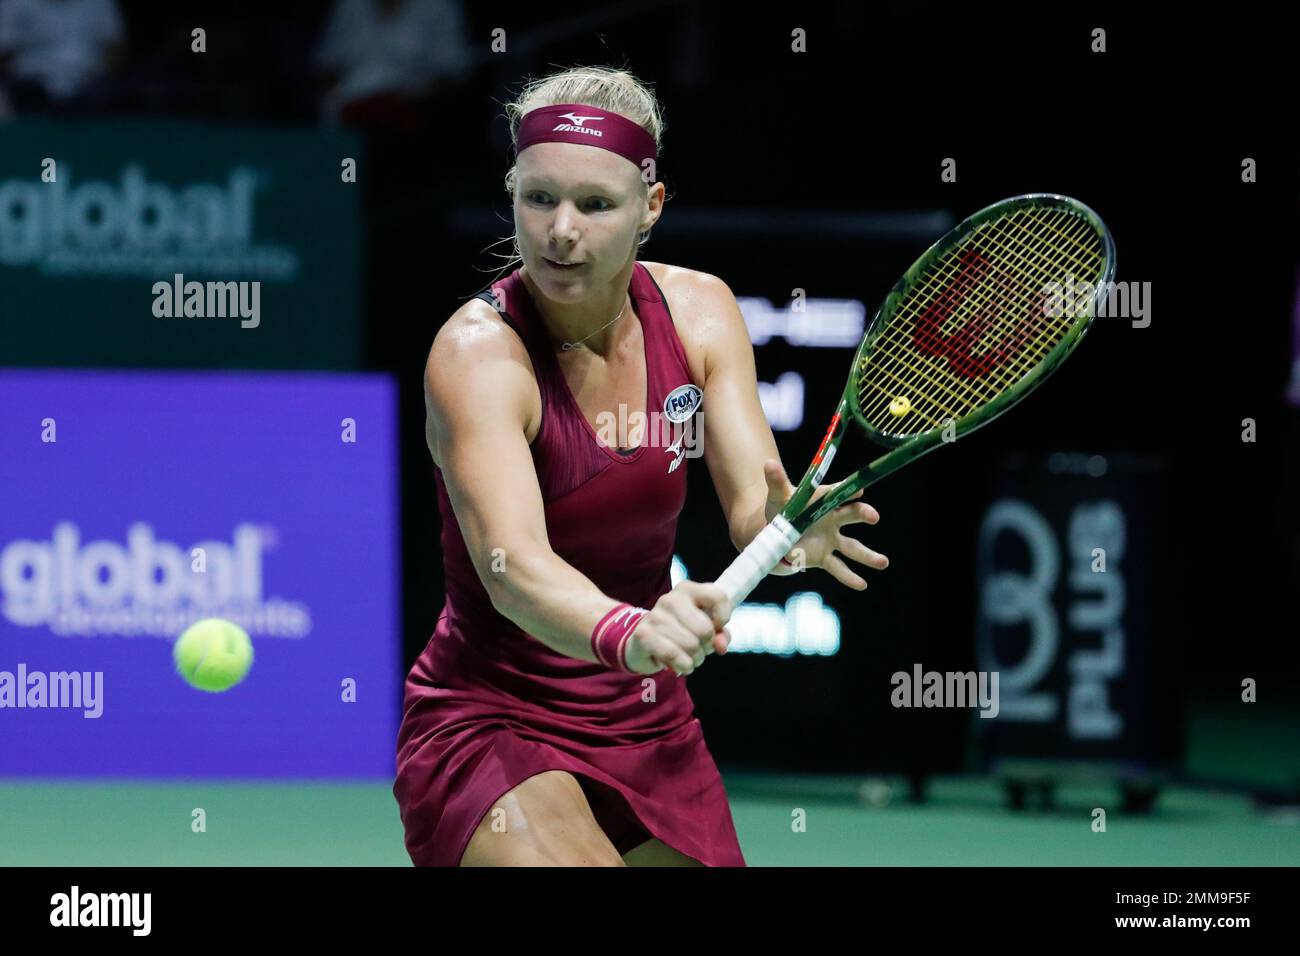 Kiki Bertens of the Netherlands plays a return shot while competing  againstNaomi Osaka of Japan during their women's singles match at the WTA  tennis finals in Singapore, Friday, Oct. 26, 2018. (AP